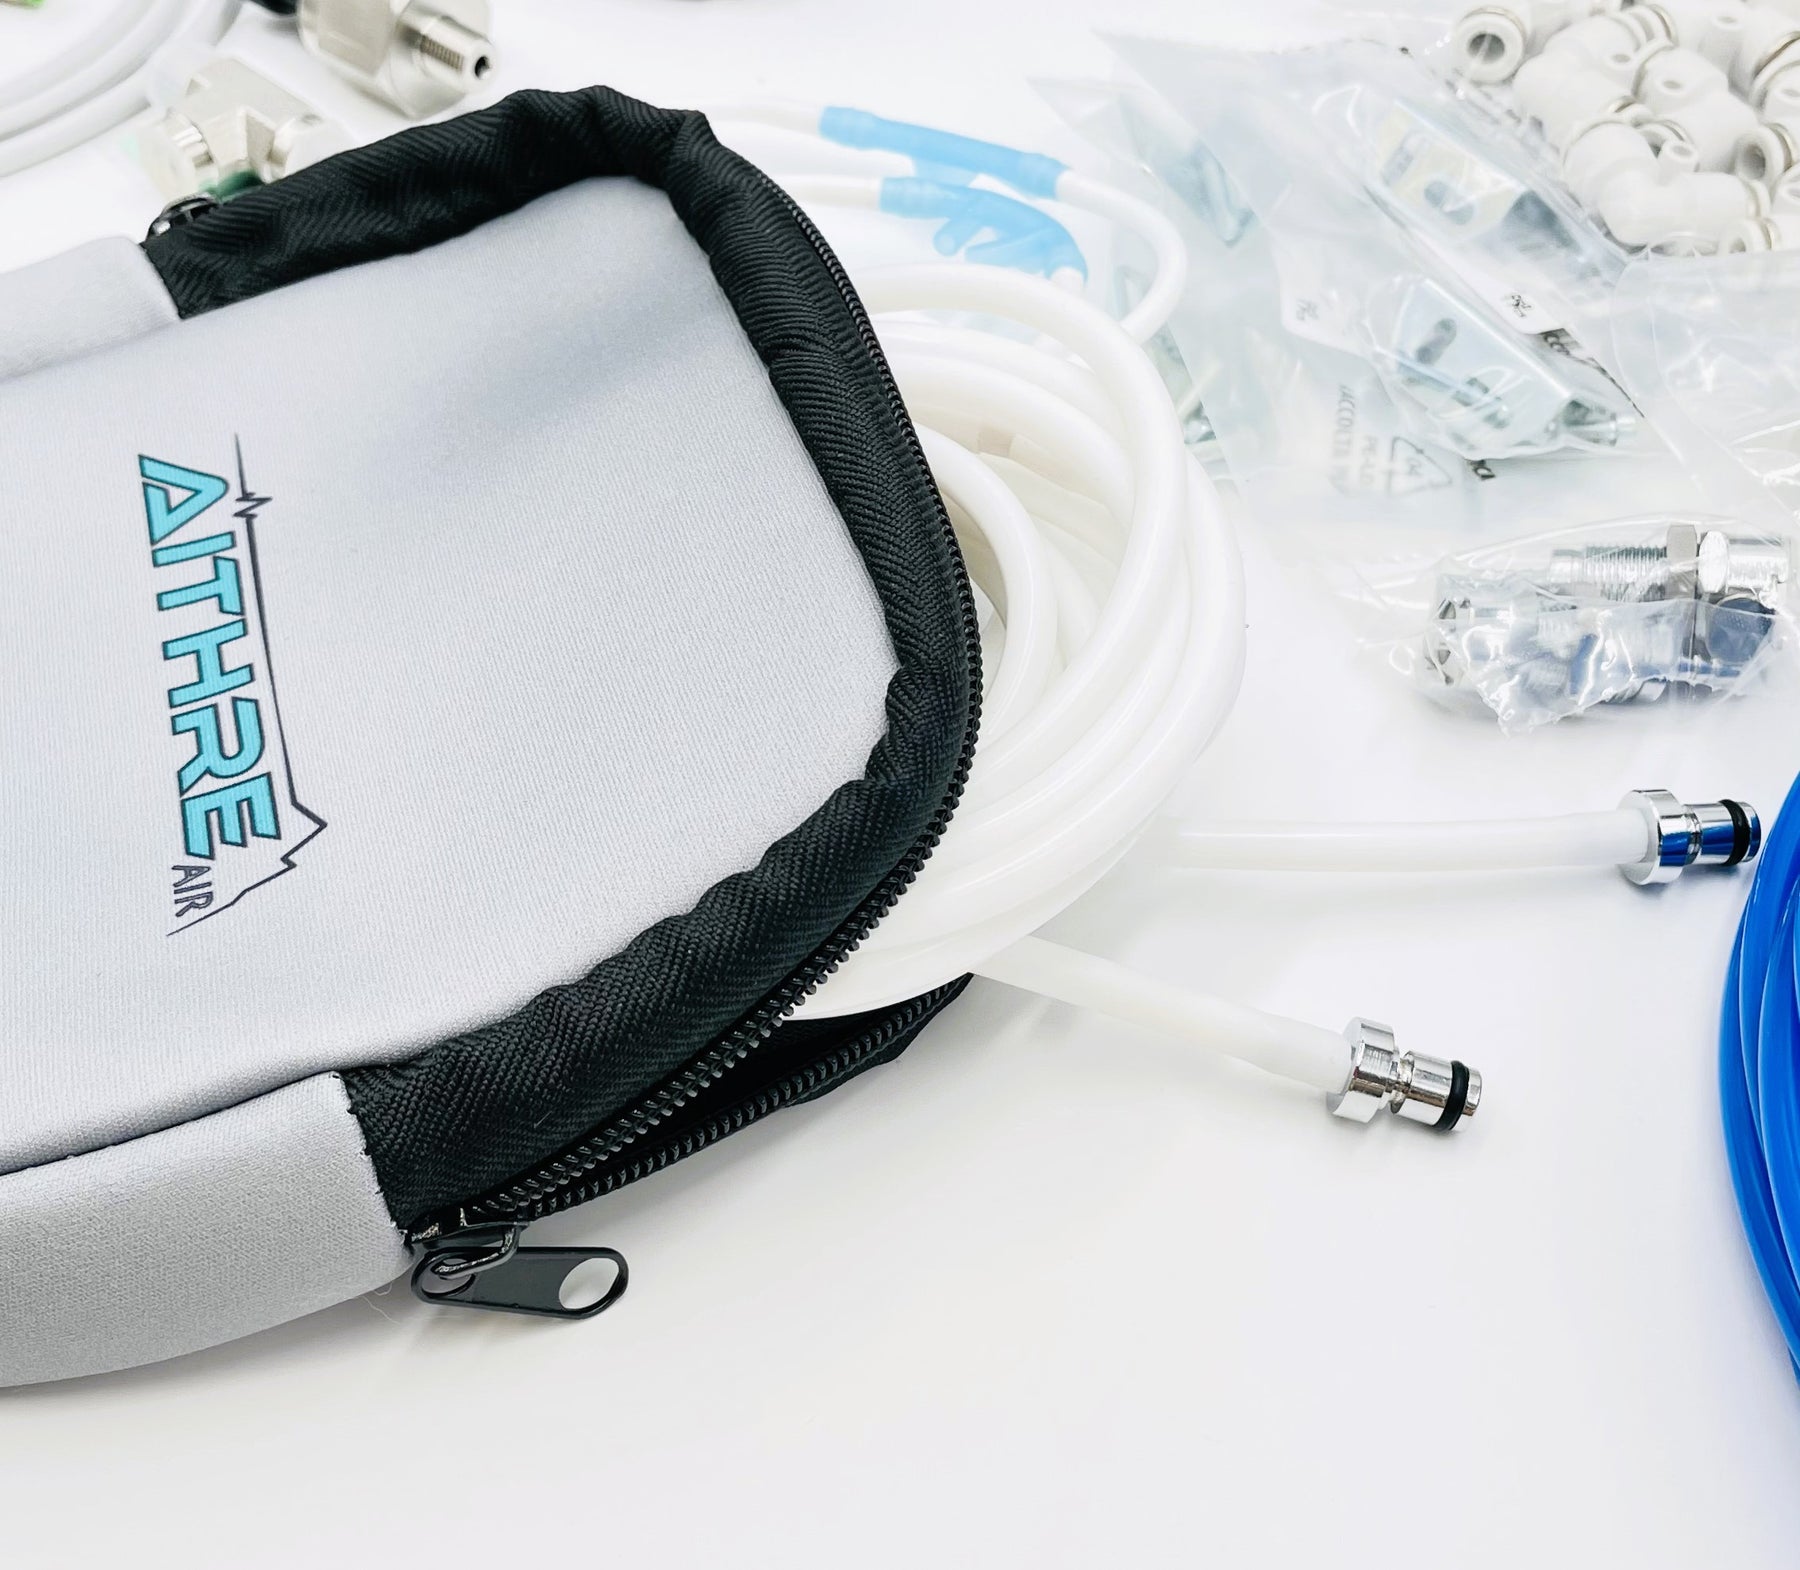 AVI32C 2-Place Smart Oxygen System for Certified Aircraft